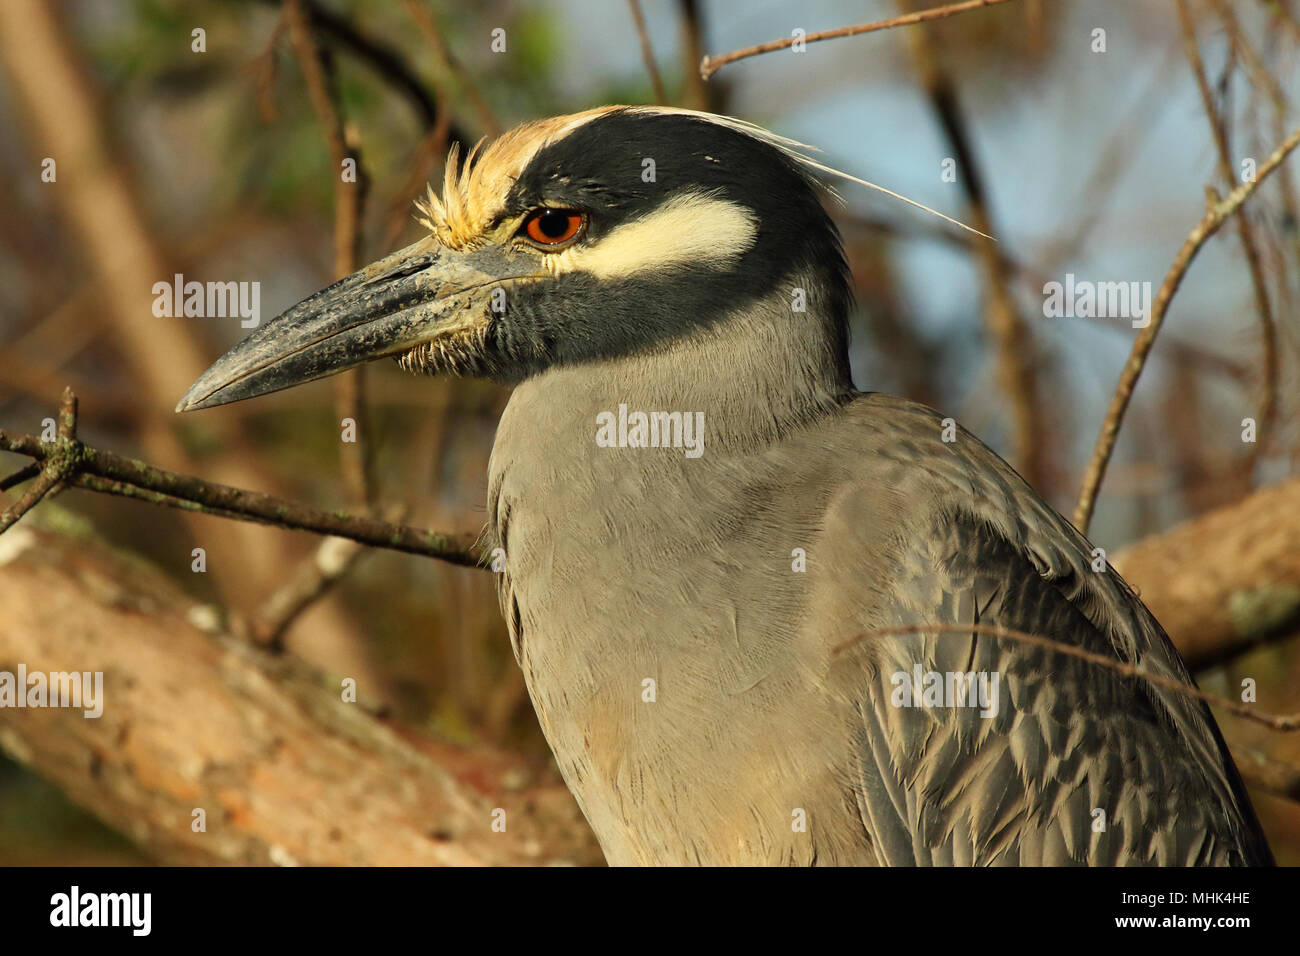 A woodsy portrait of a Black-crowned Night Heron. Stock Photo